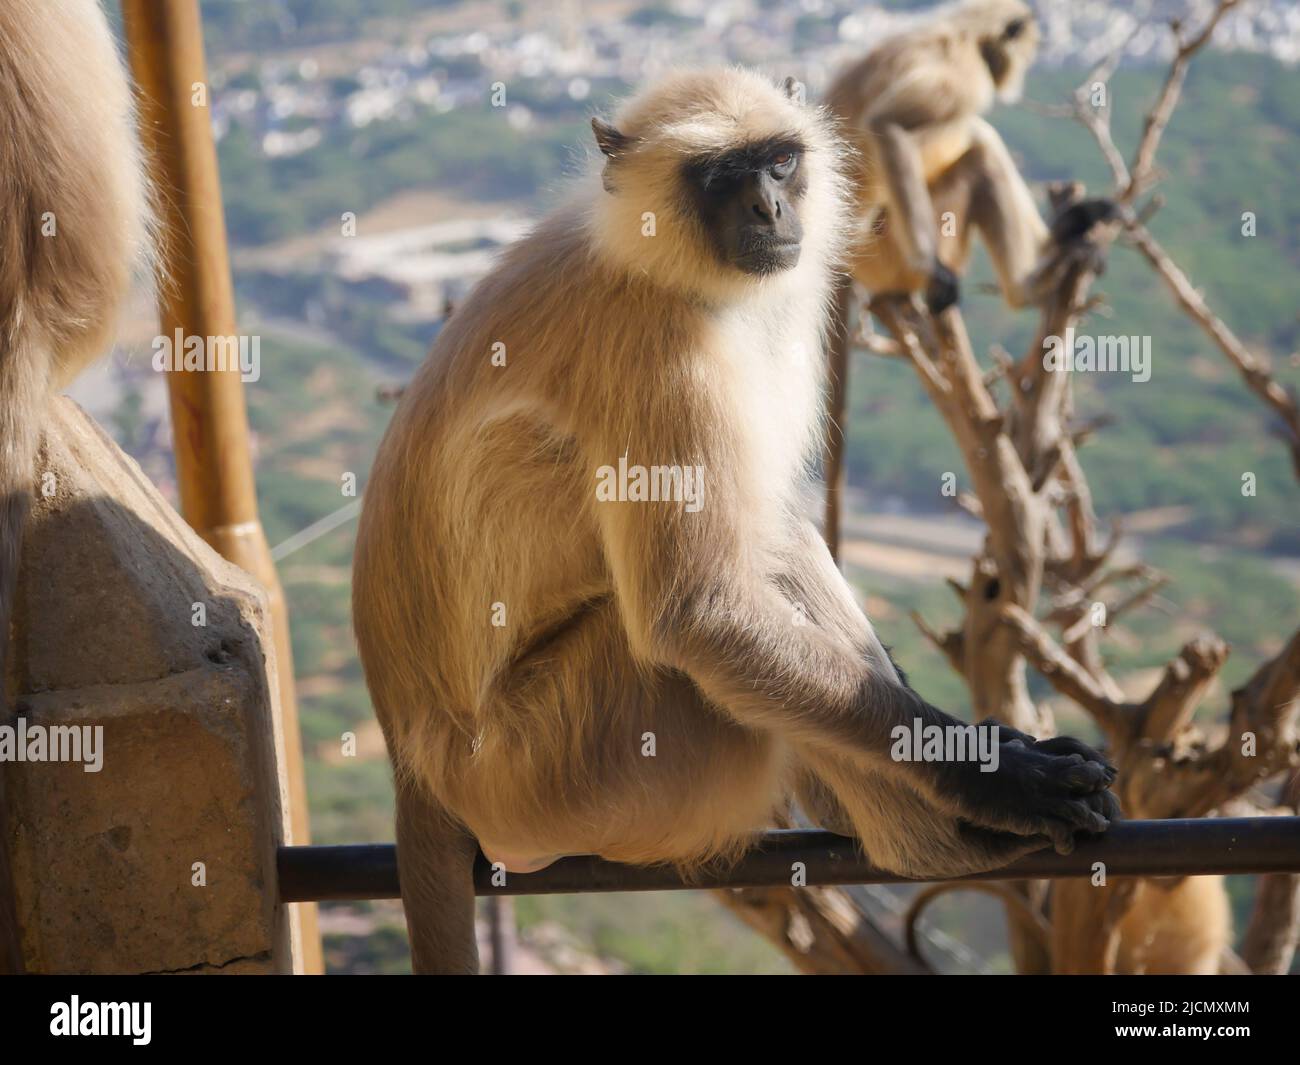 Gray langur monkey also known as hanuman langurs relaxing and watching people Stock Photo